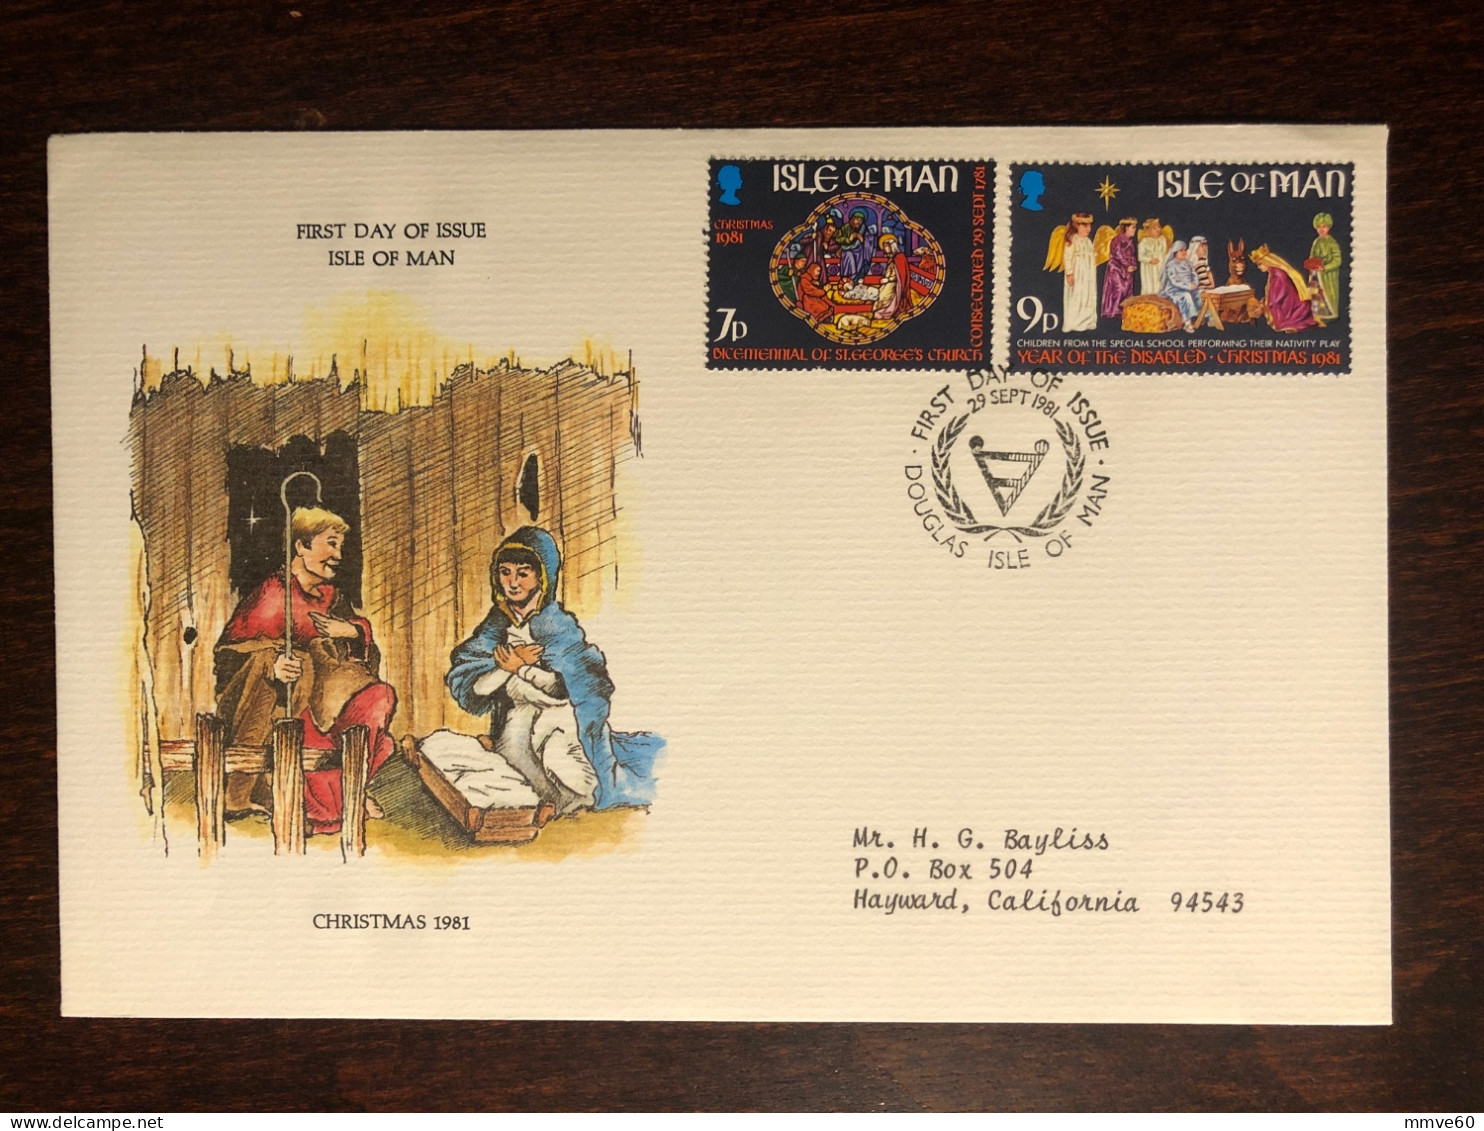 MAN ISLAND FDC COVER 1981 YEAR DISABLED PEOPLE HEALTH MEDICINE STAMPS - Man (Ile De)